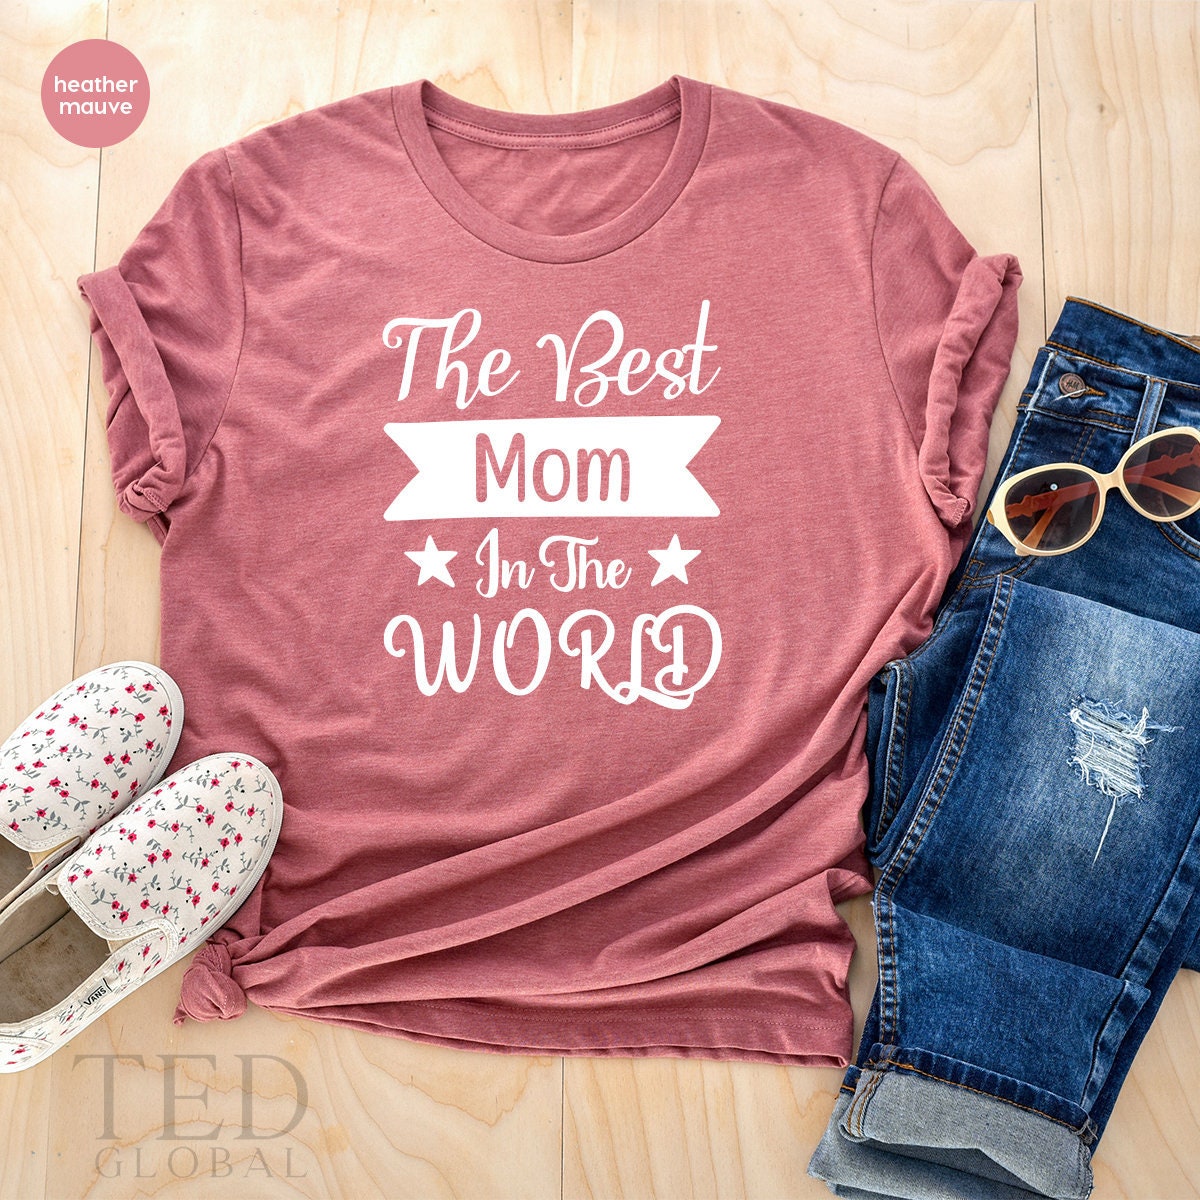 Last-Minute Mother's Day Gifts Mom Will Love • MidgetMomma